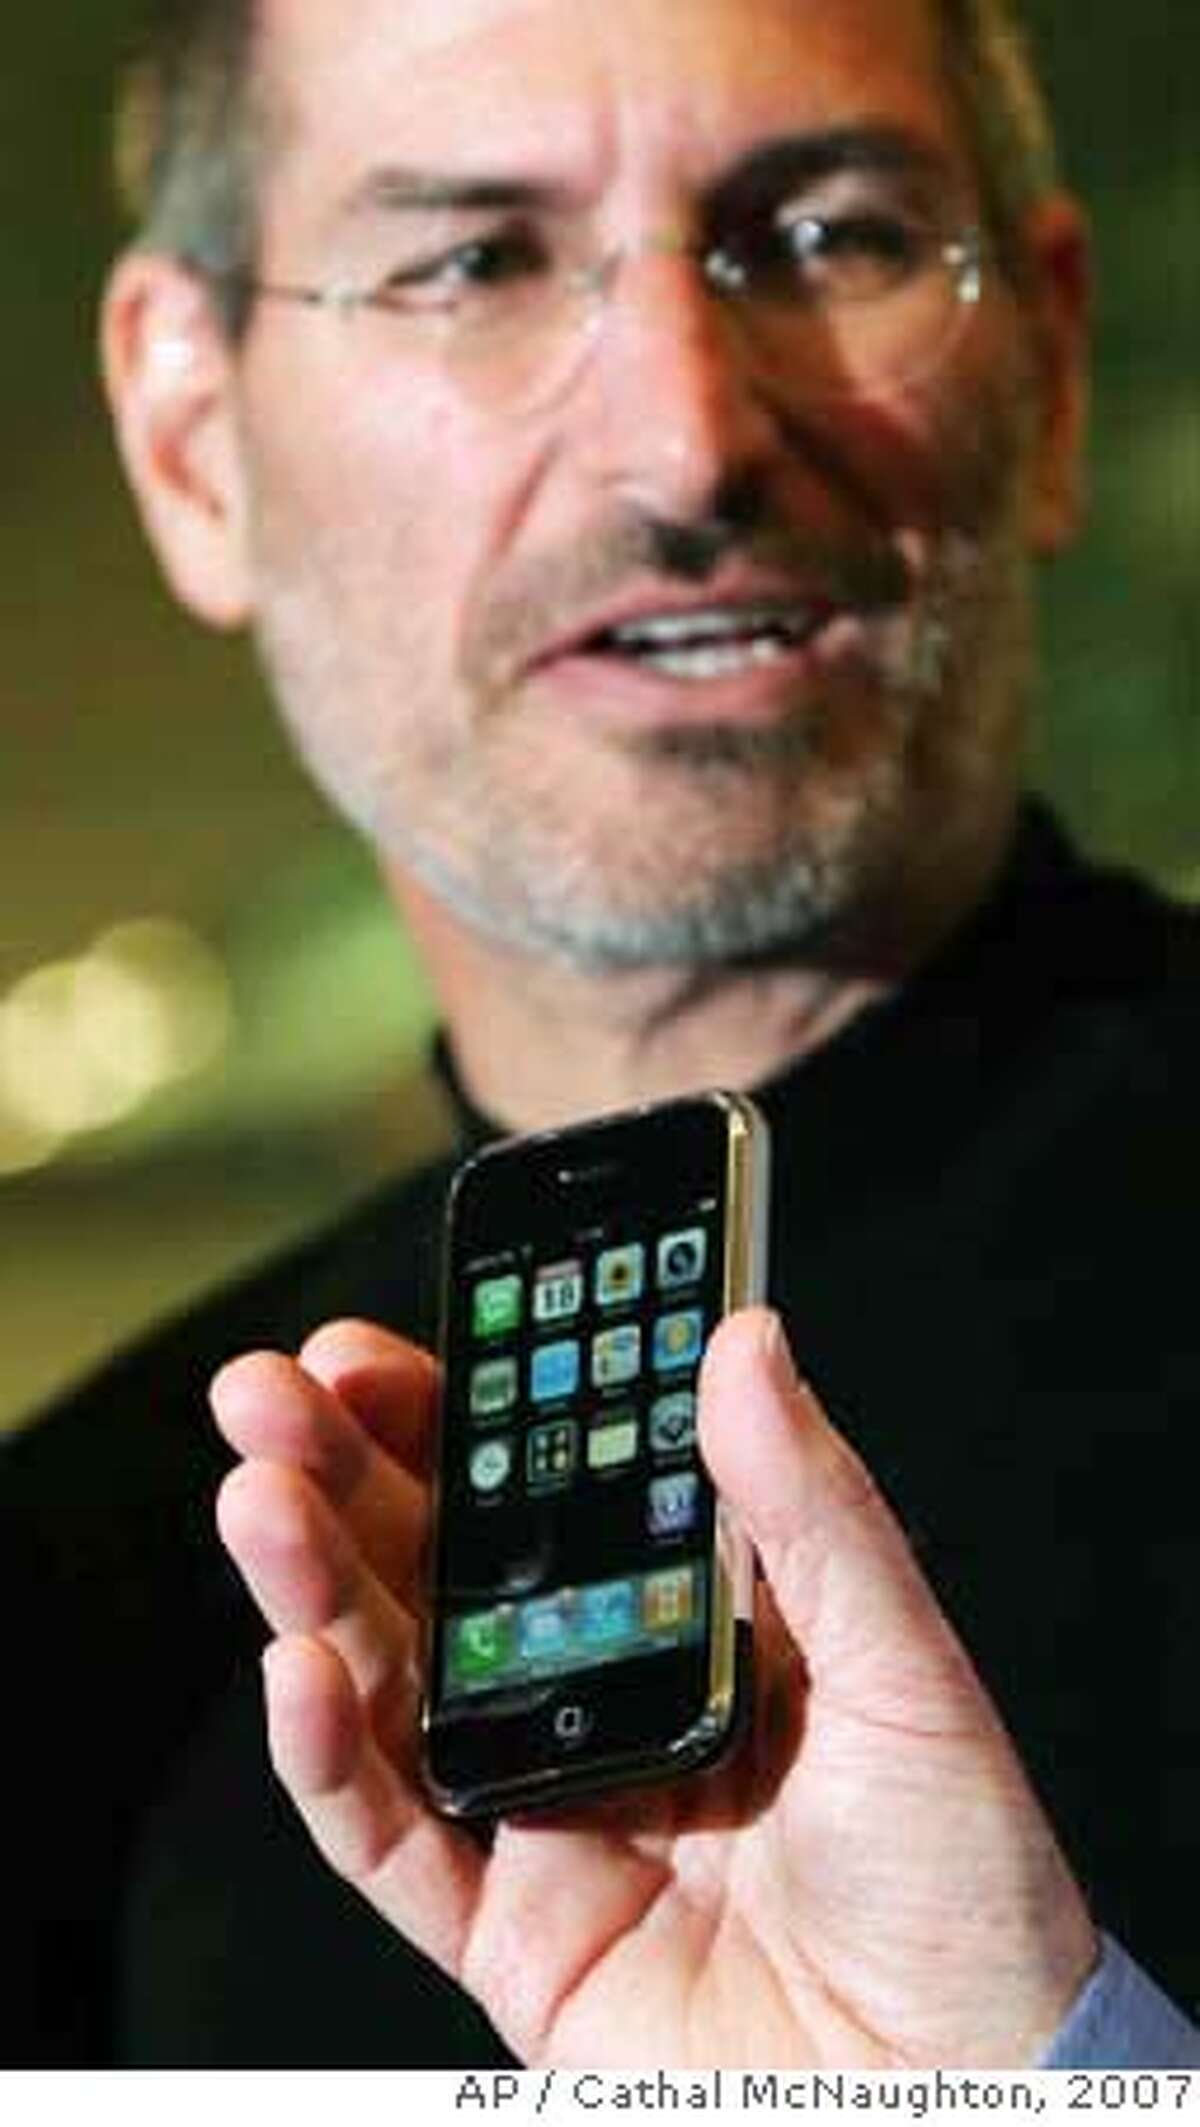 ###Live Caption:Apple CEO Steve Jobs is seen at the Apple store on Regent Street for the announcement of its long-awaited iPhone, as an unidentified person holds up the device in the foreground, London, Sept. 18, 2007. Apple Inc.'s iPhone will go on sale in Britain on Nov. 9 and have the O2 network as its exclusive carrier, Apple CEO Steve Jobs said Tuesday. The 8-gigabyte model will sell for 269 pounds (US$536, euro 386). (AP Photo/PA, Cathal McNaughton) ** UNITED KINGDOM OUT NO SALES NO ARCHIVE ** Ran on: 09-19-2007 Apple CEO Steve Jobs appears at an Apple store in London to announce plans to sell the iPhone in Britain through carrier O2, without the discounts typical of even high-end phones in Europe.###Caption History:Apple CEO Steve Jobs is seen at the Apple store on Regent Street for the announcement of its long-awaited iPhone, as an unidentified person holds up the device in the foreground, London, Sept. 18, 2007. Apple Inc.'s iPhone will go on sale in Britain on Nov. 9 and have the O2 network as its exclusive carrier, Apple CEO Steve Jobs said Tuesday. The 8-gigabyte model will sell for 269 pounds (US$536, euro 386). (AP Photo/PA, Cathal McNaughton) ** UNITED KINGDOM OUT NO SALES NO ARCHIVE ** Ran on: 09-19-2007 Apple CEO Steve Jobs appears at an Apple store in London to announce plans to sell the iPhone in Britain through carrier O2, without the discounts typical of even high-end phones in Europe.###Notes:###Special Instructions:UNITED KINGDOM OUT NO SALES NO ARCHIVE - PHOTOGRAPH CAN NOT BE STORED OR USED FOR MORE THAN 14 DAYS AFTER THE DAY OF TRANSMISSION